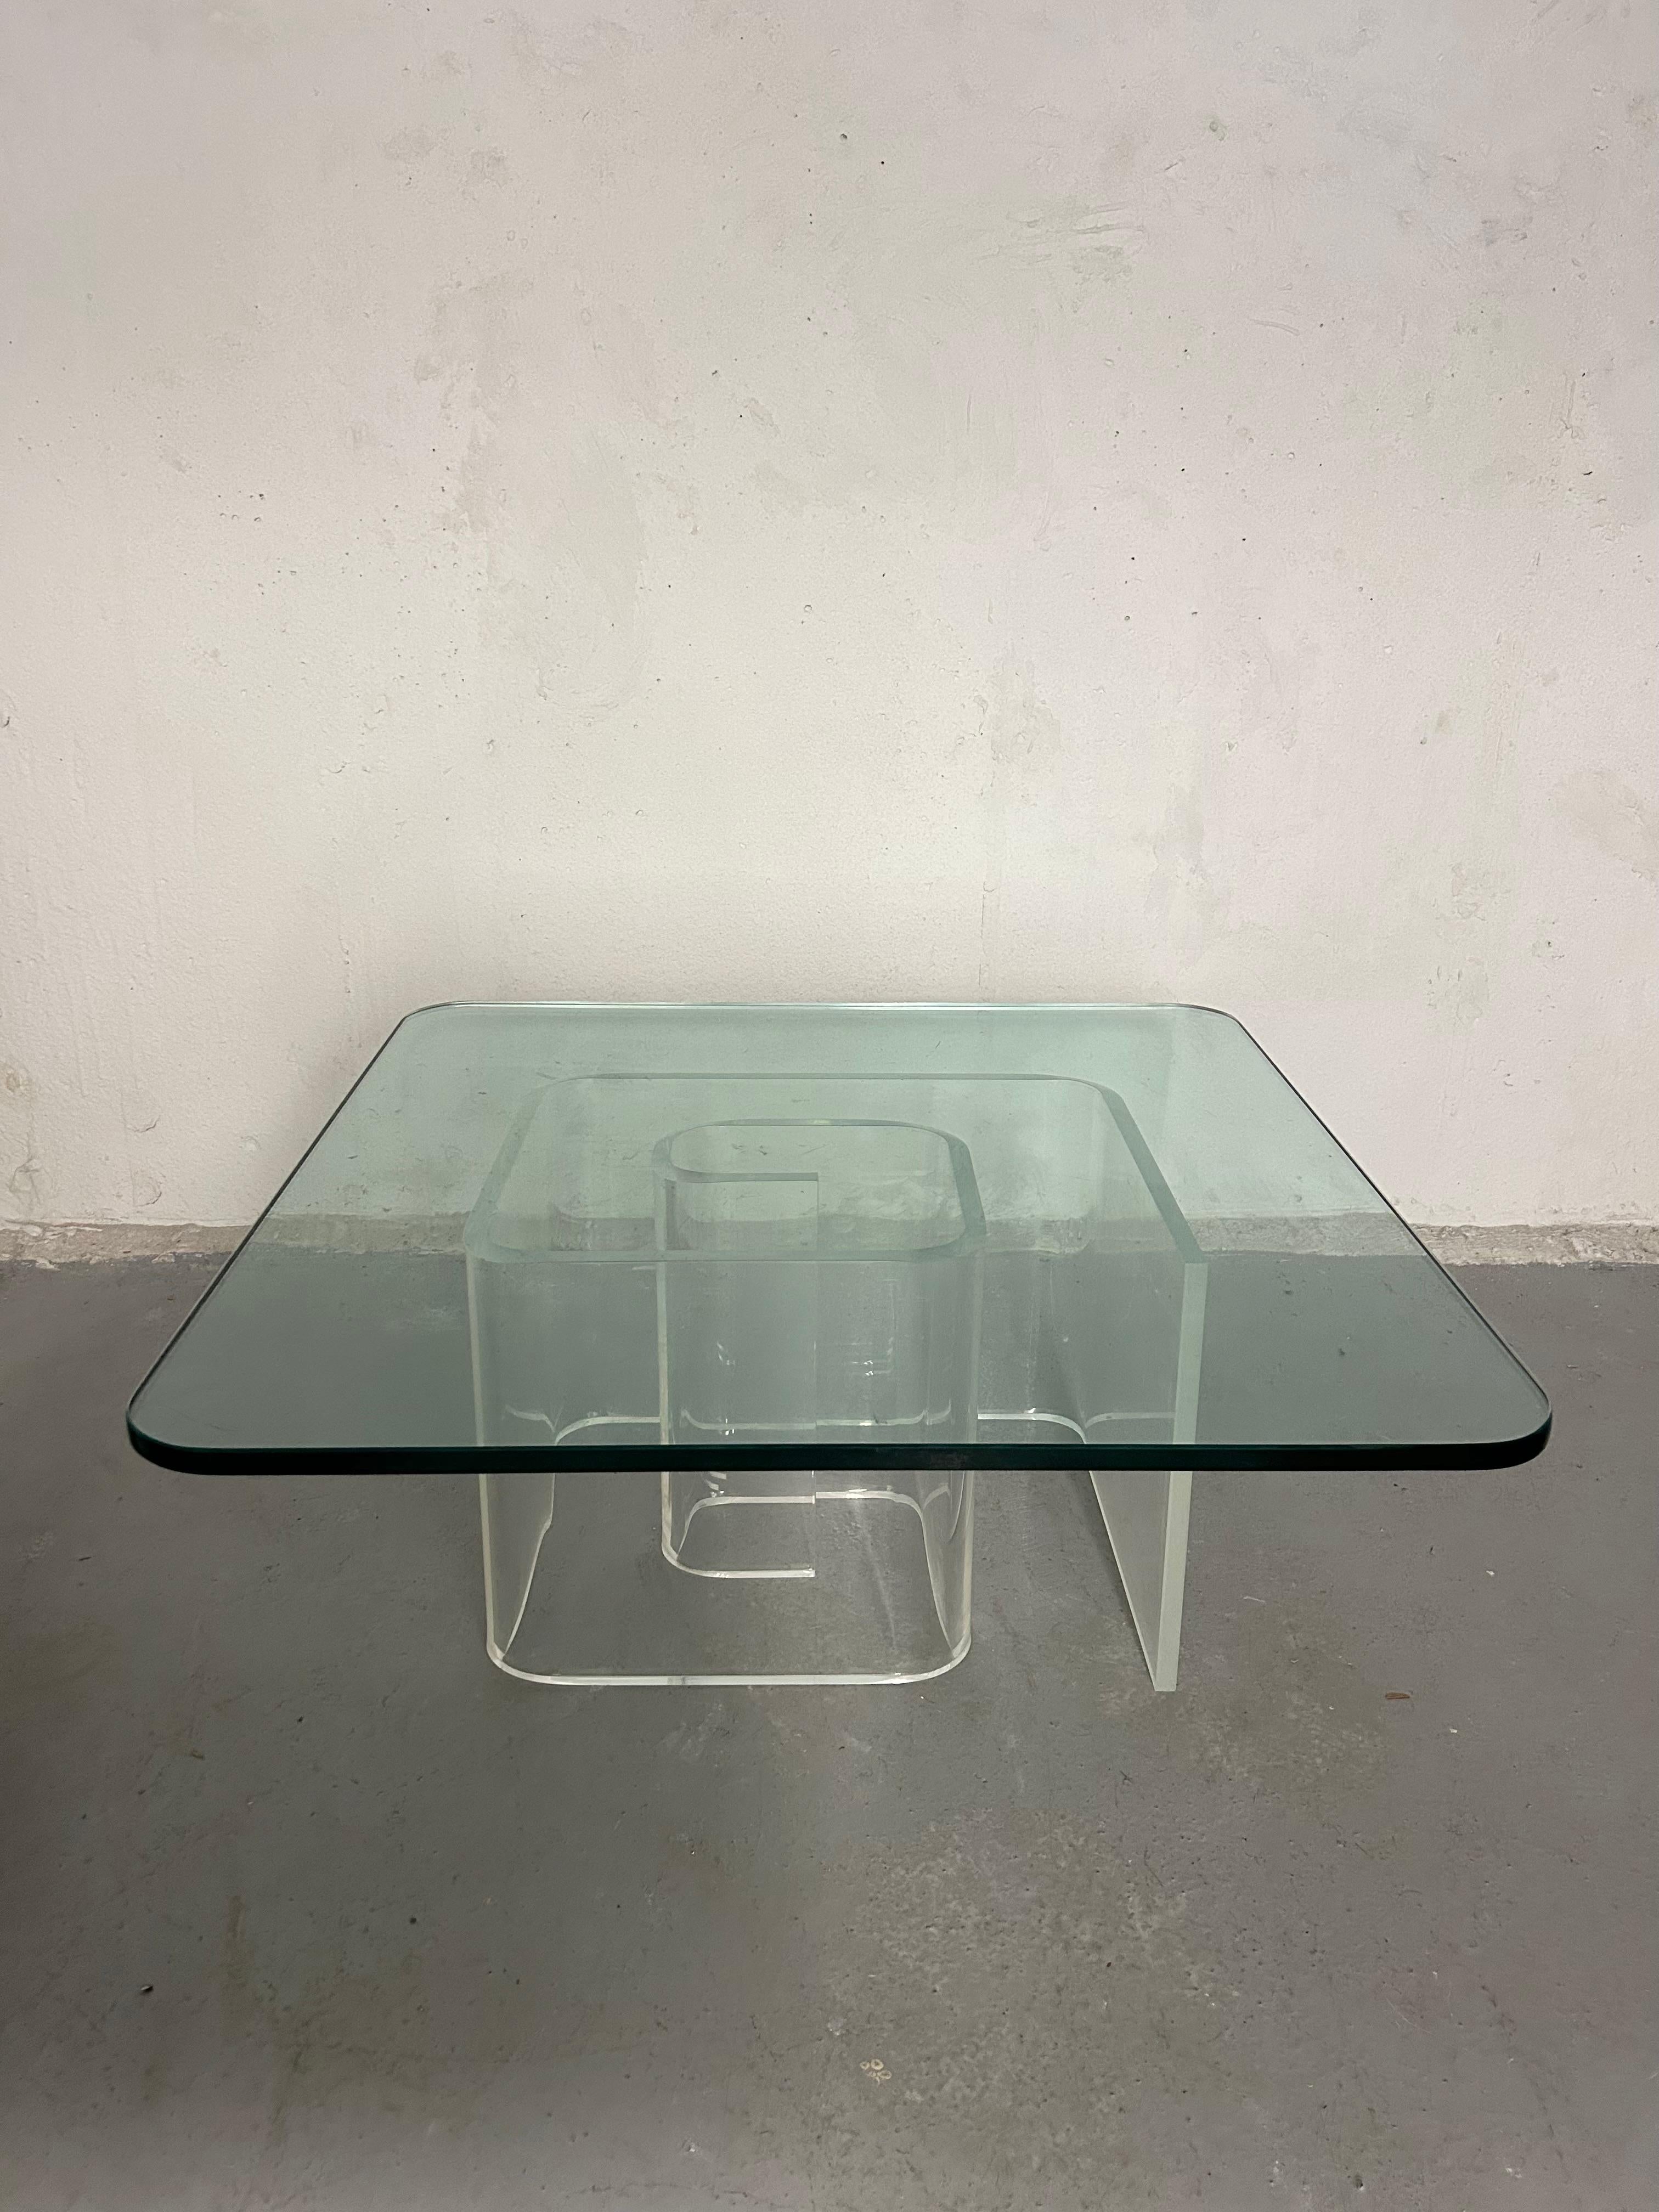 Vintage lucite and glass coffee table. Lucite base is a thick snail shaped sculptural design. 3/4” square glass sits separately on top. Lucite base has a little crystal using most likely due to the sun but it’s hard to see once the glass is sitting